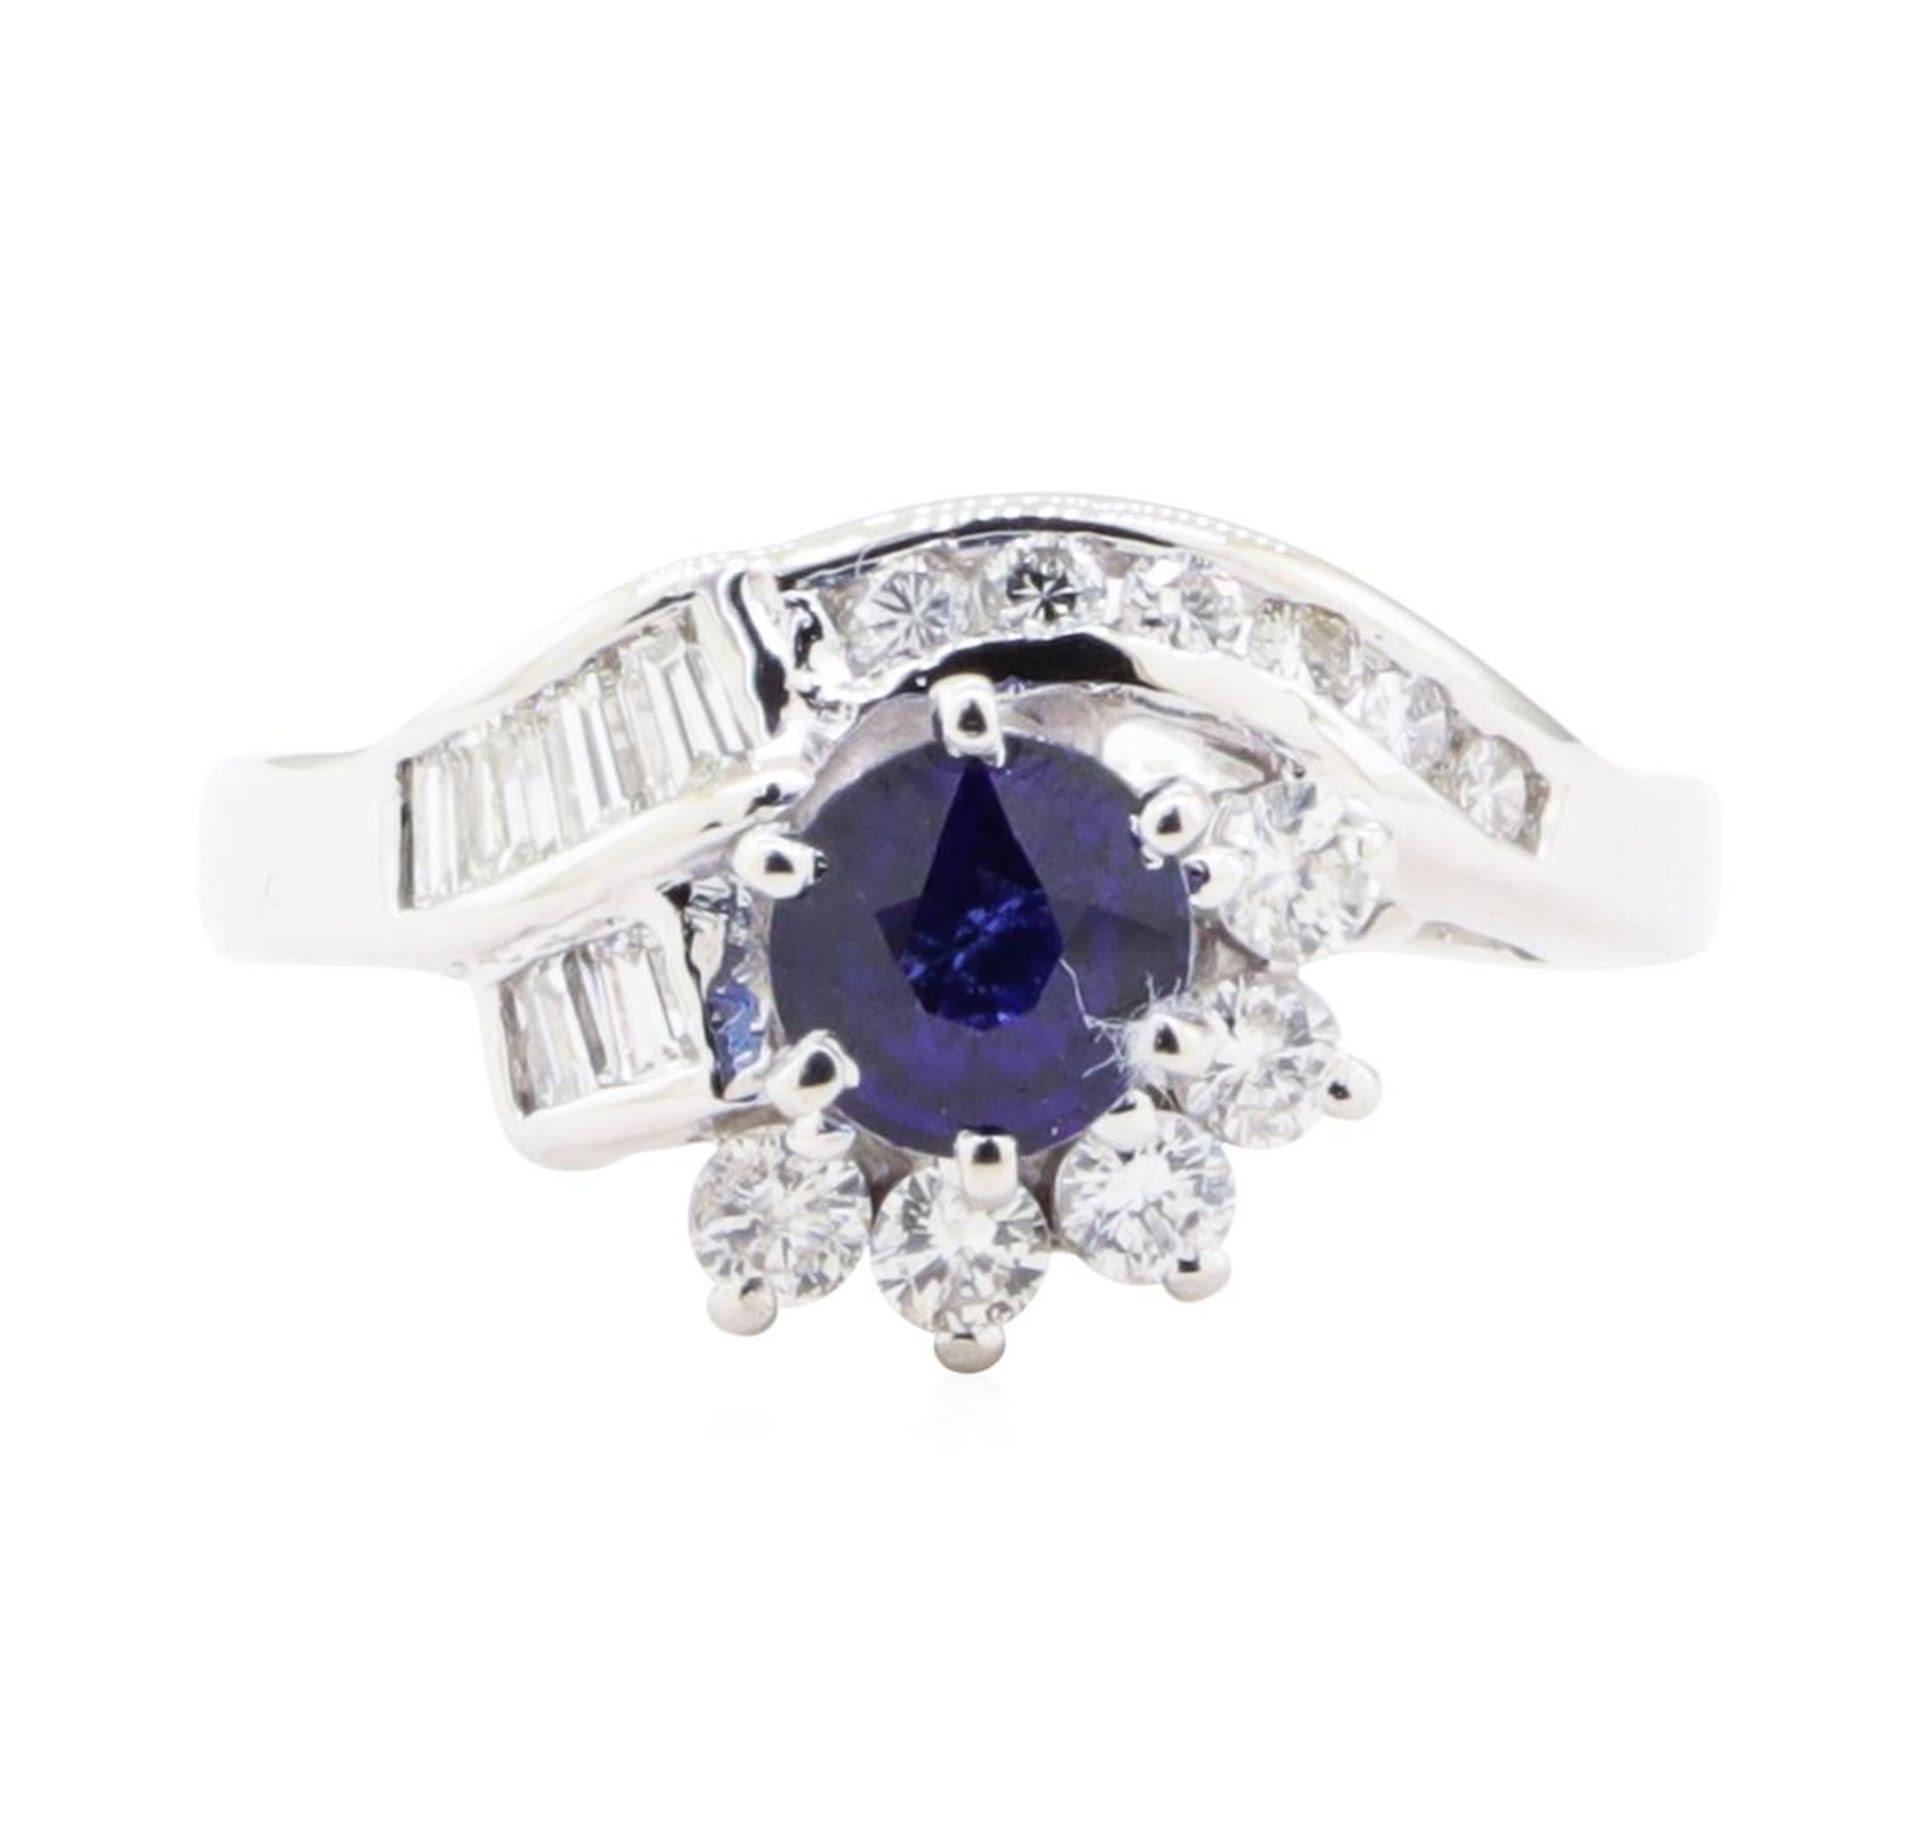 1.13 ctw Sapphire and Diamond Ring - 14KT White Gold - Image 2 of 4